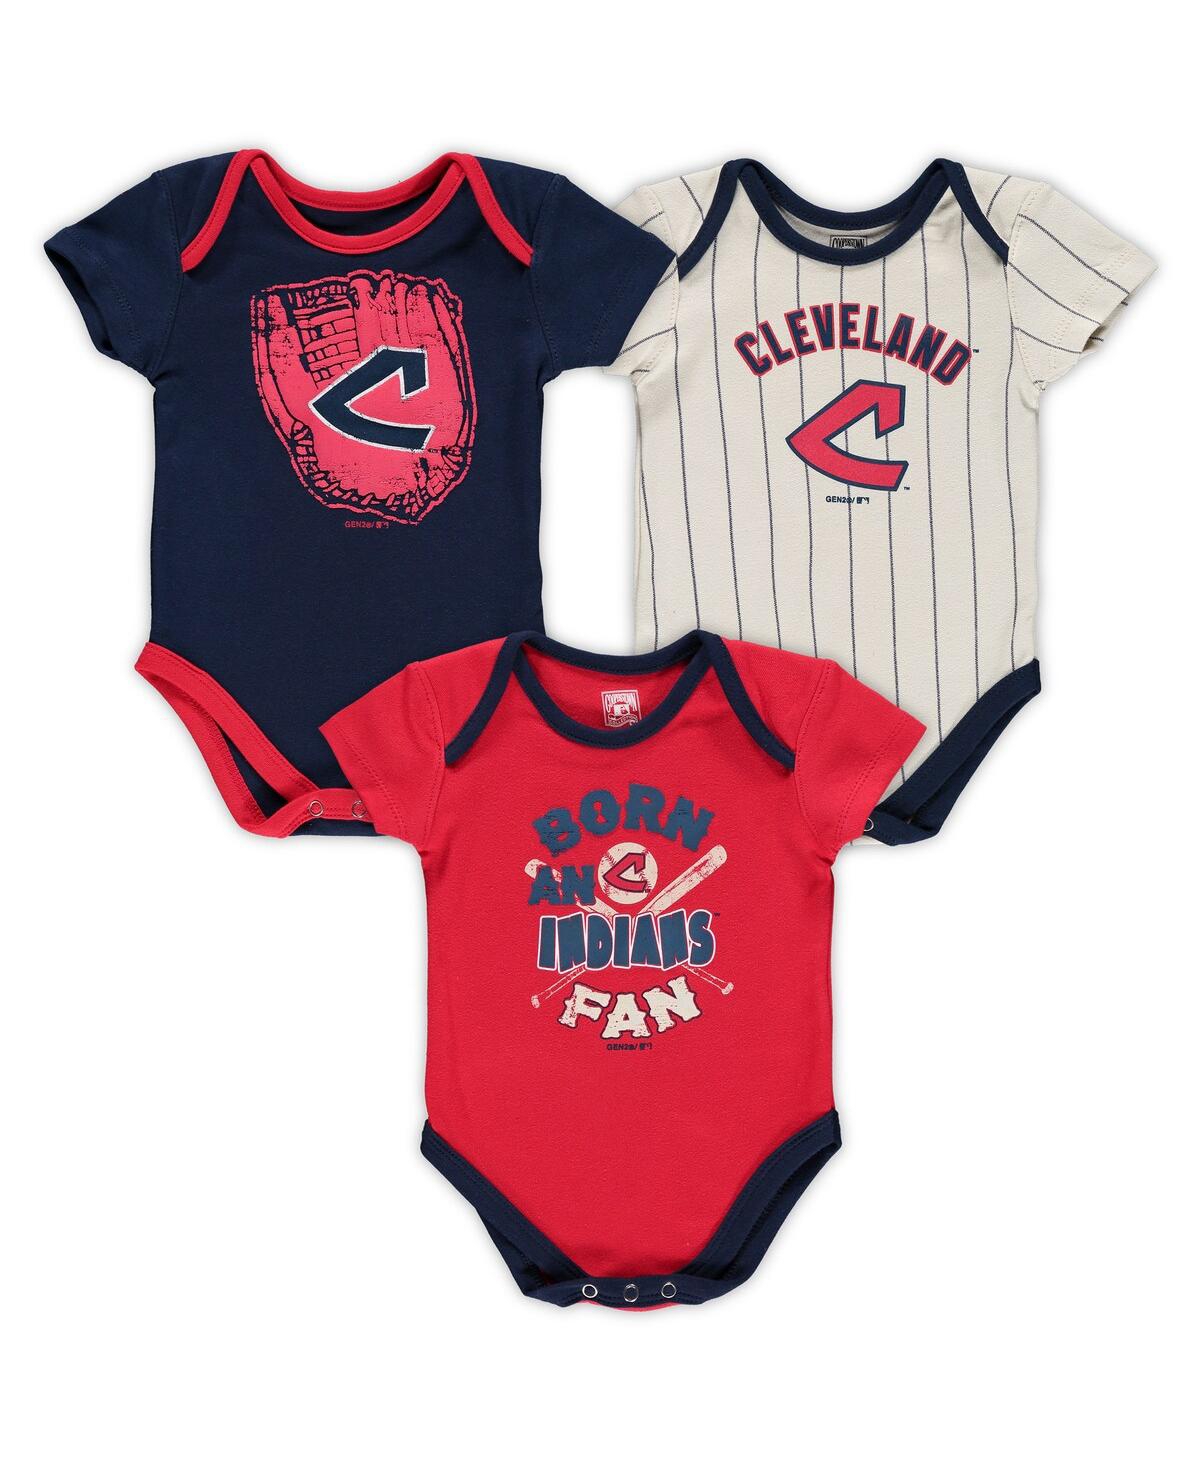 Outerstuff Babies' Newborn Boys And Girls Navy, Red, Cream Cleveland Indians Three-pack Number One Bodysuit In Navy,red,cream